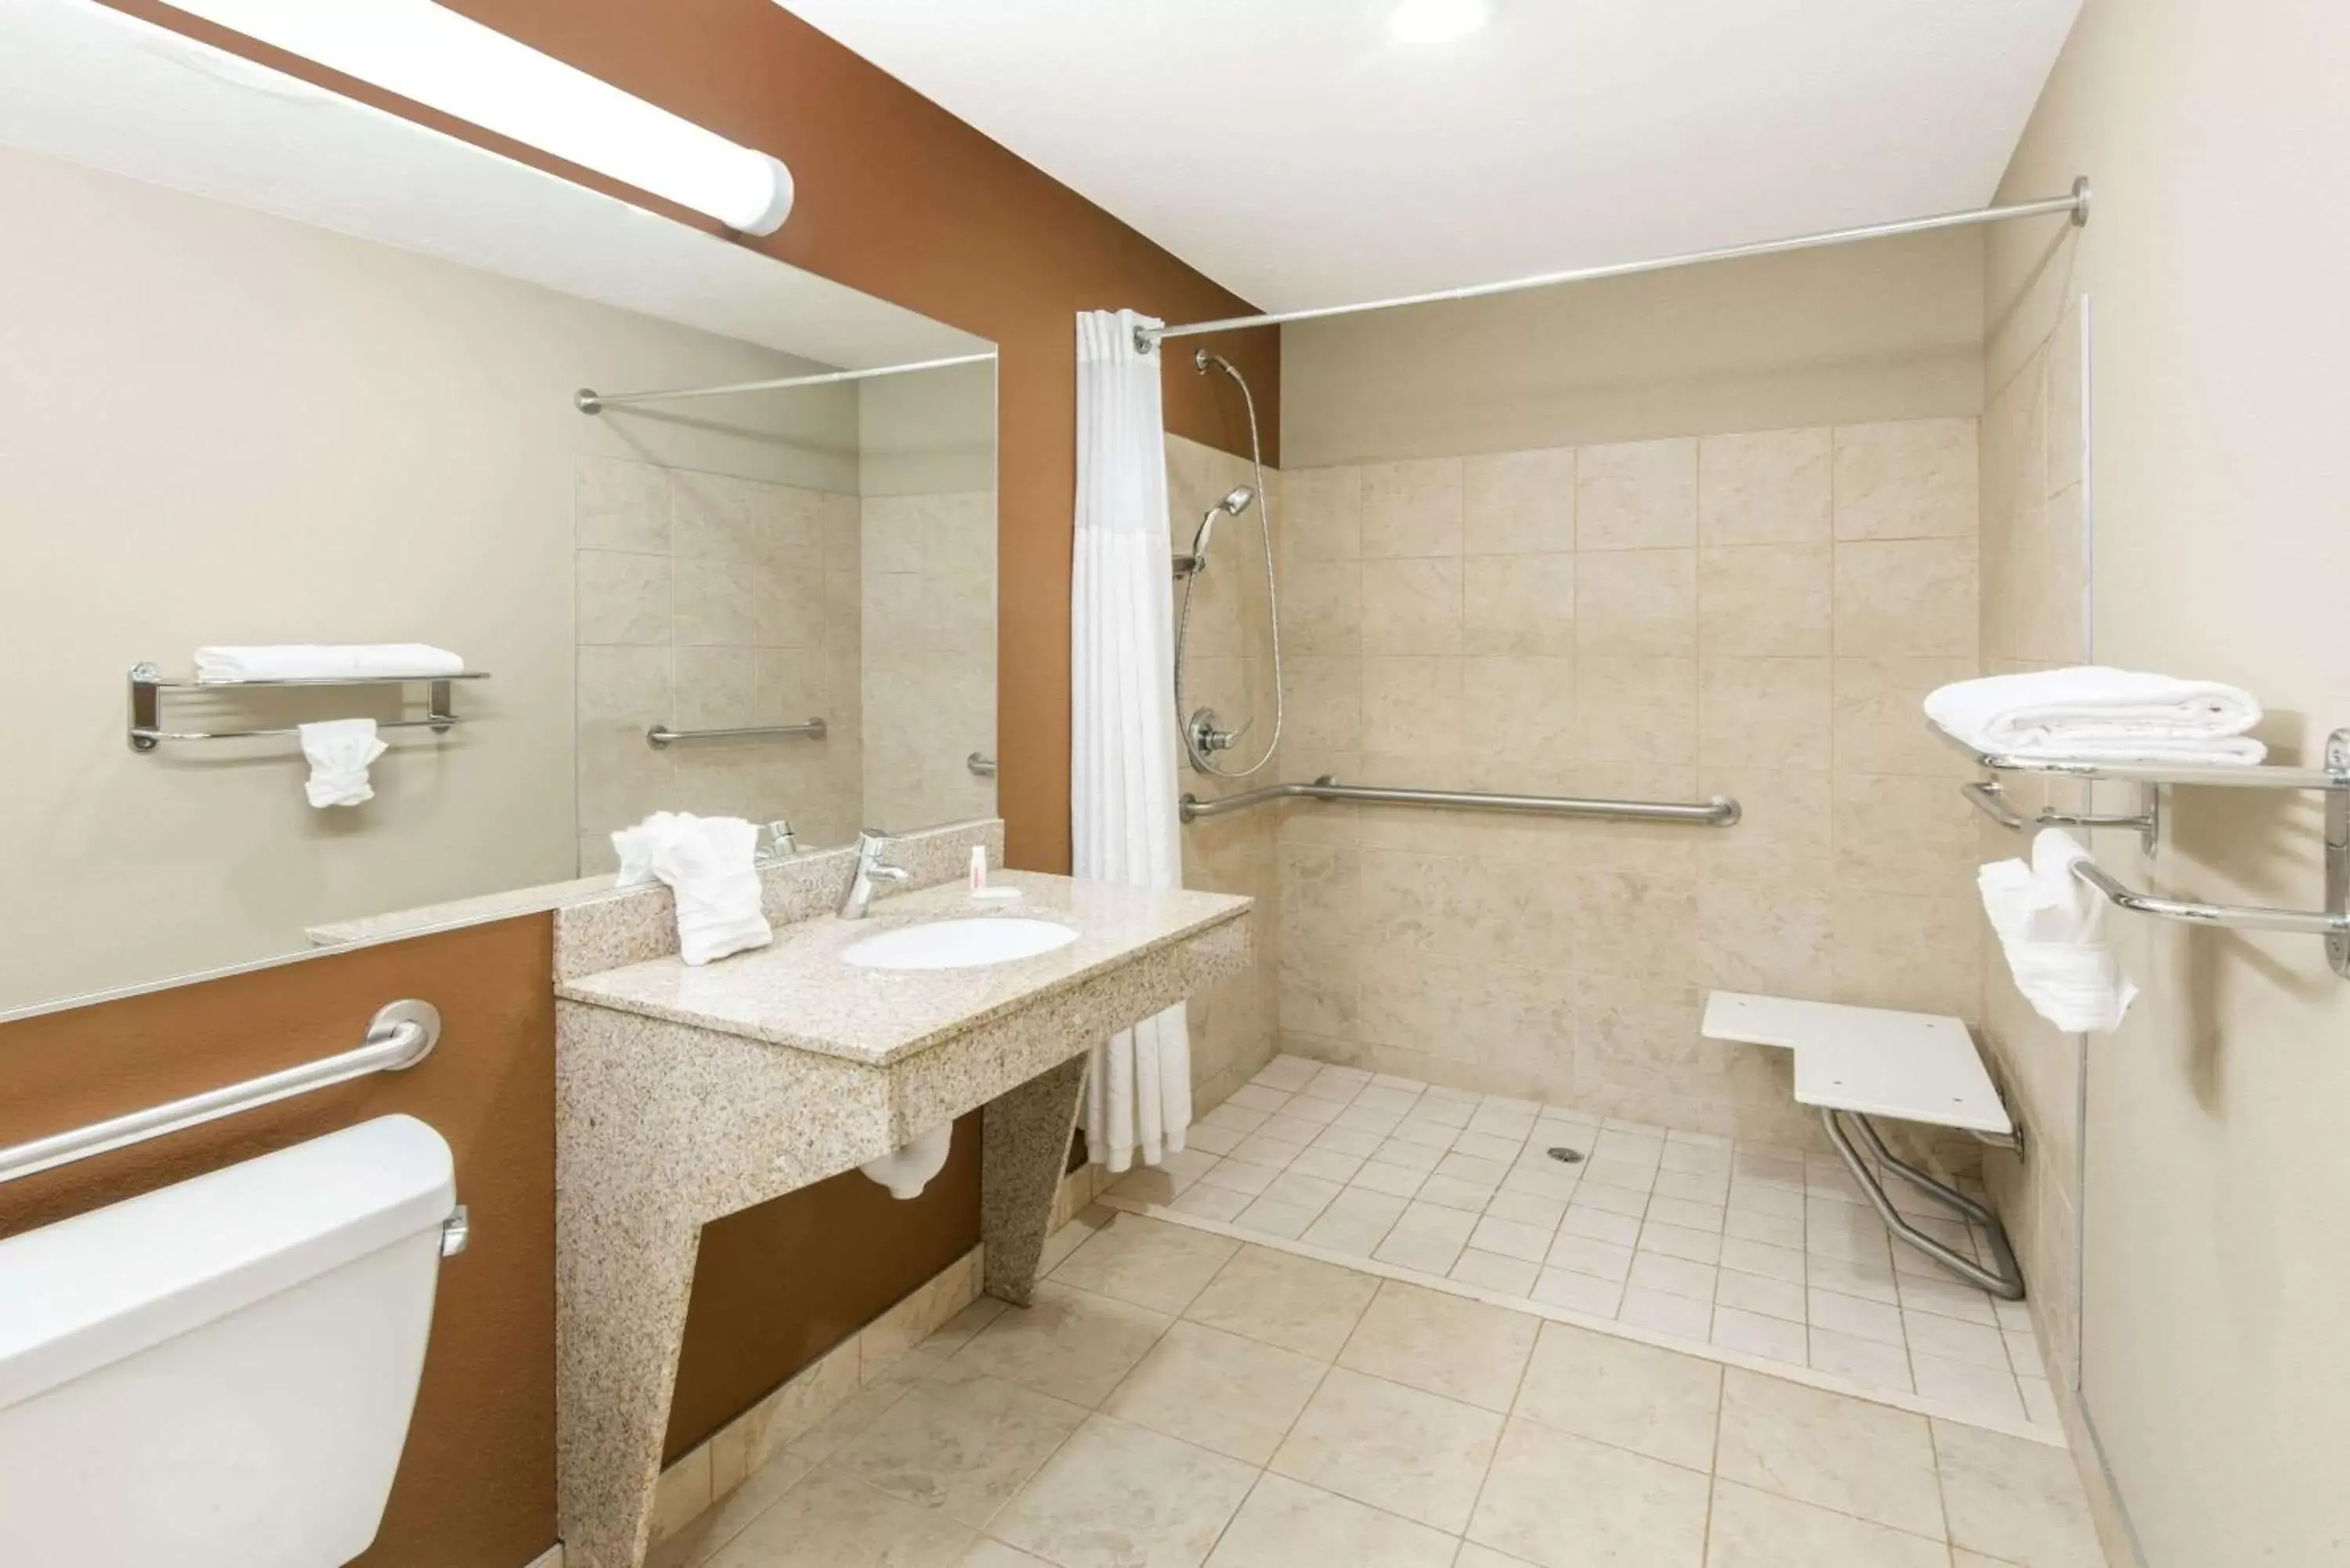 Bathroom in Microtel Inn and Suites North Canton